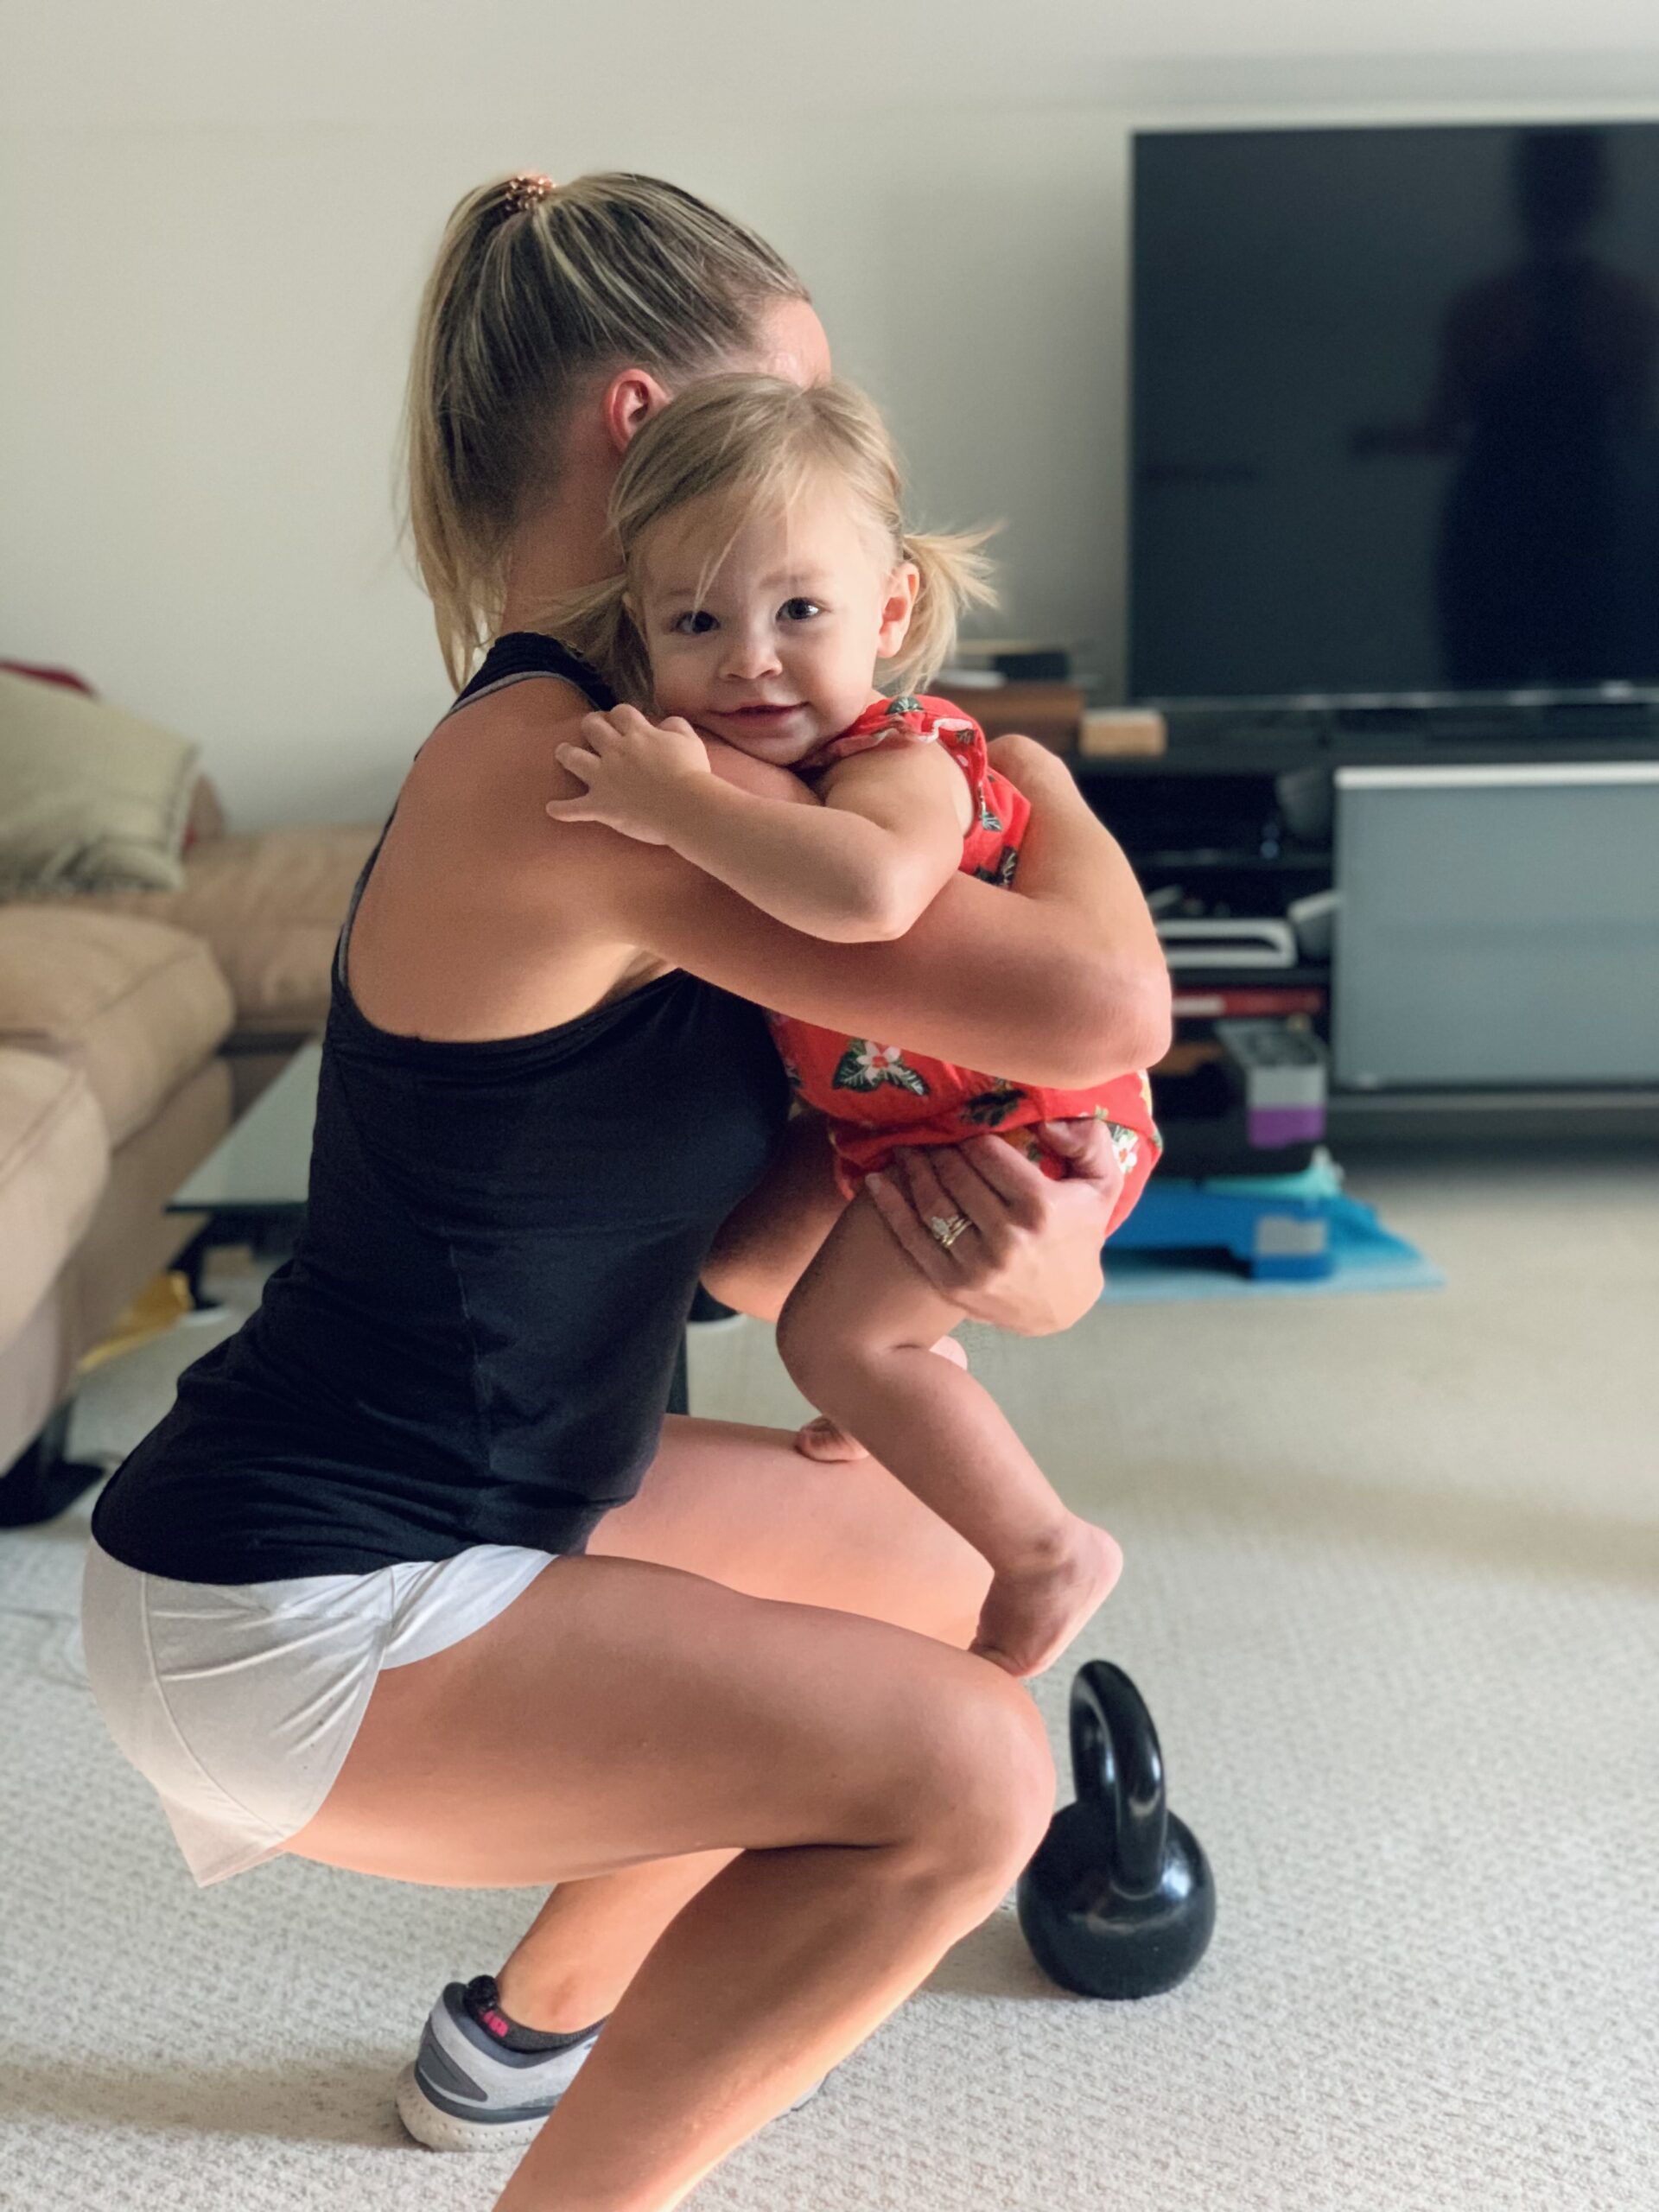 Mom performing squat while holding their child.